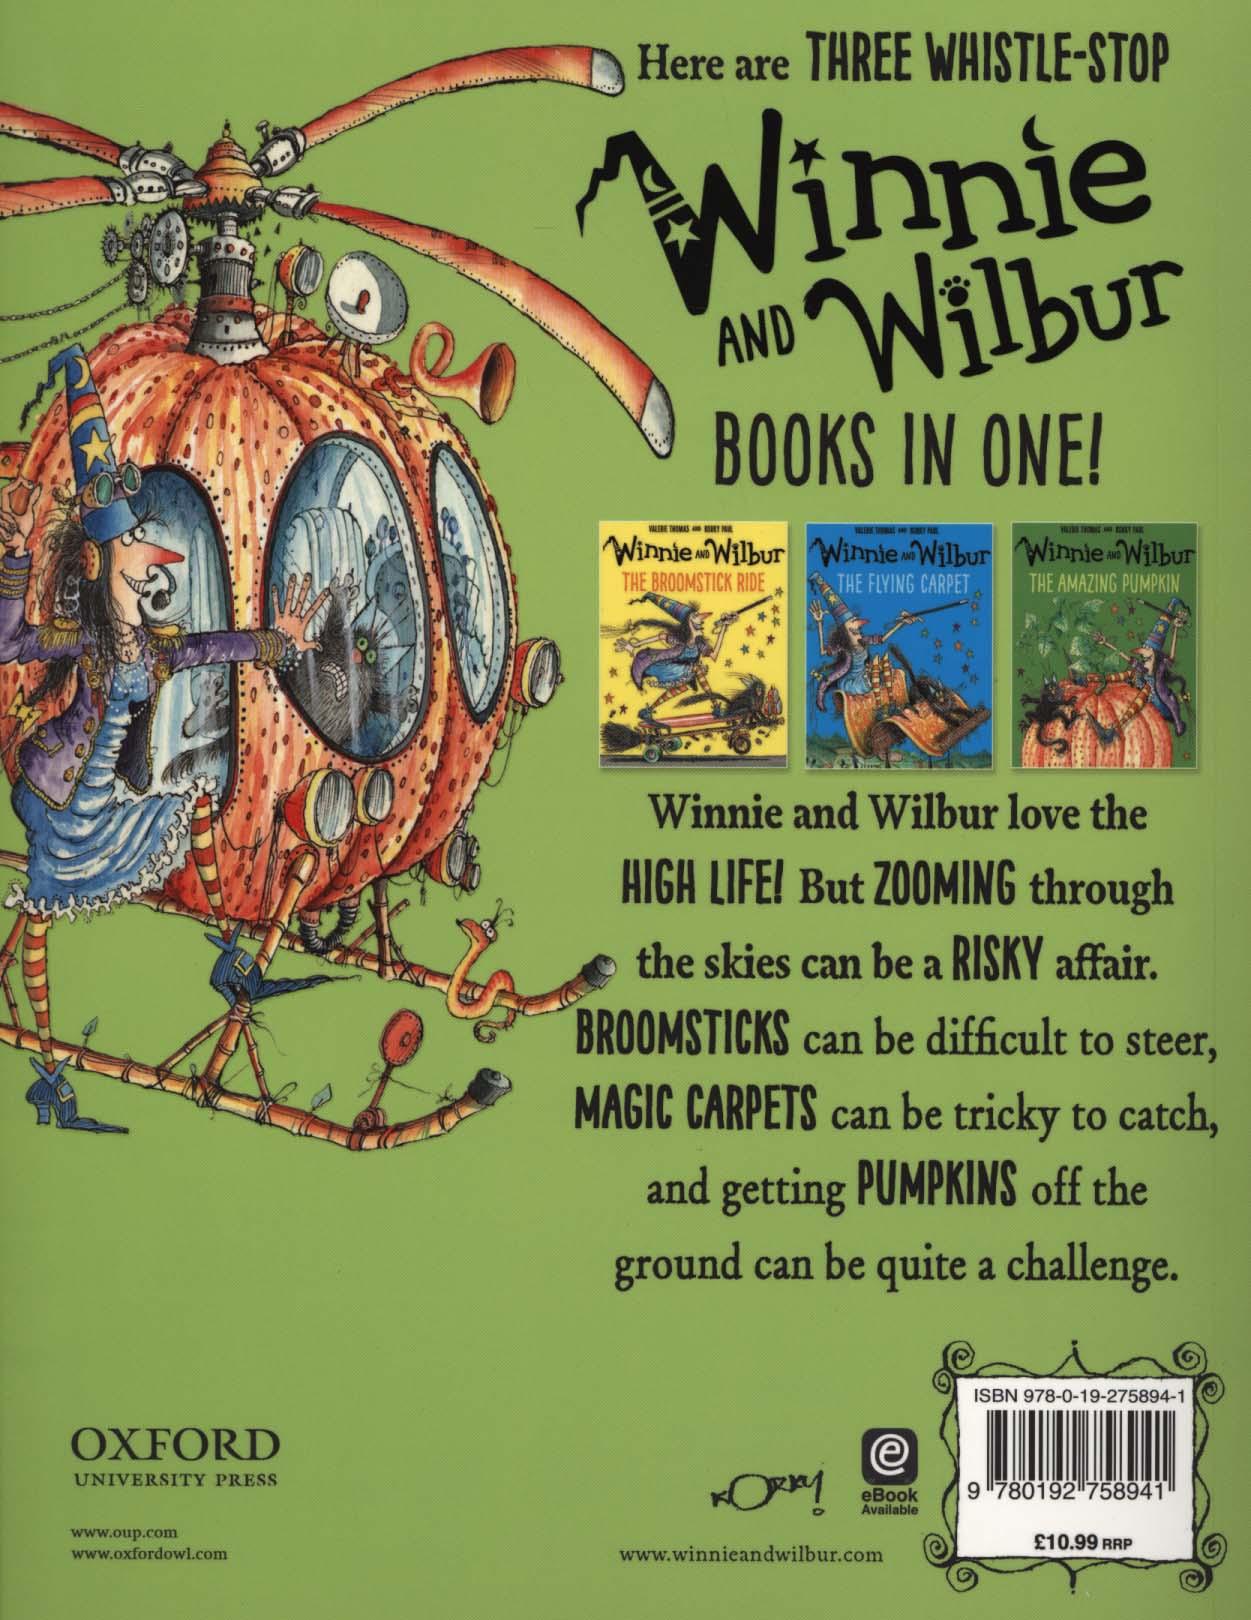 Winnie and Wilbur: Up, Up and Away